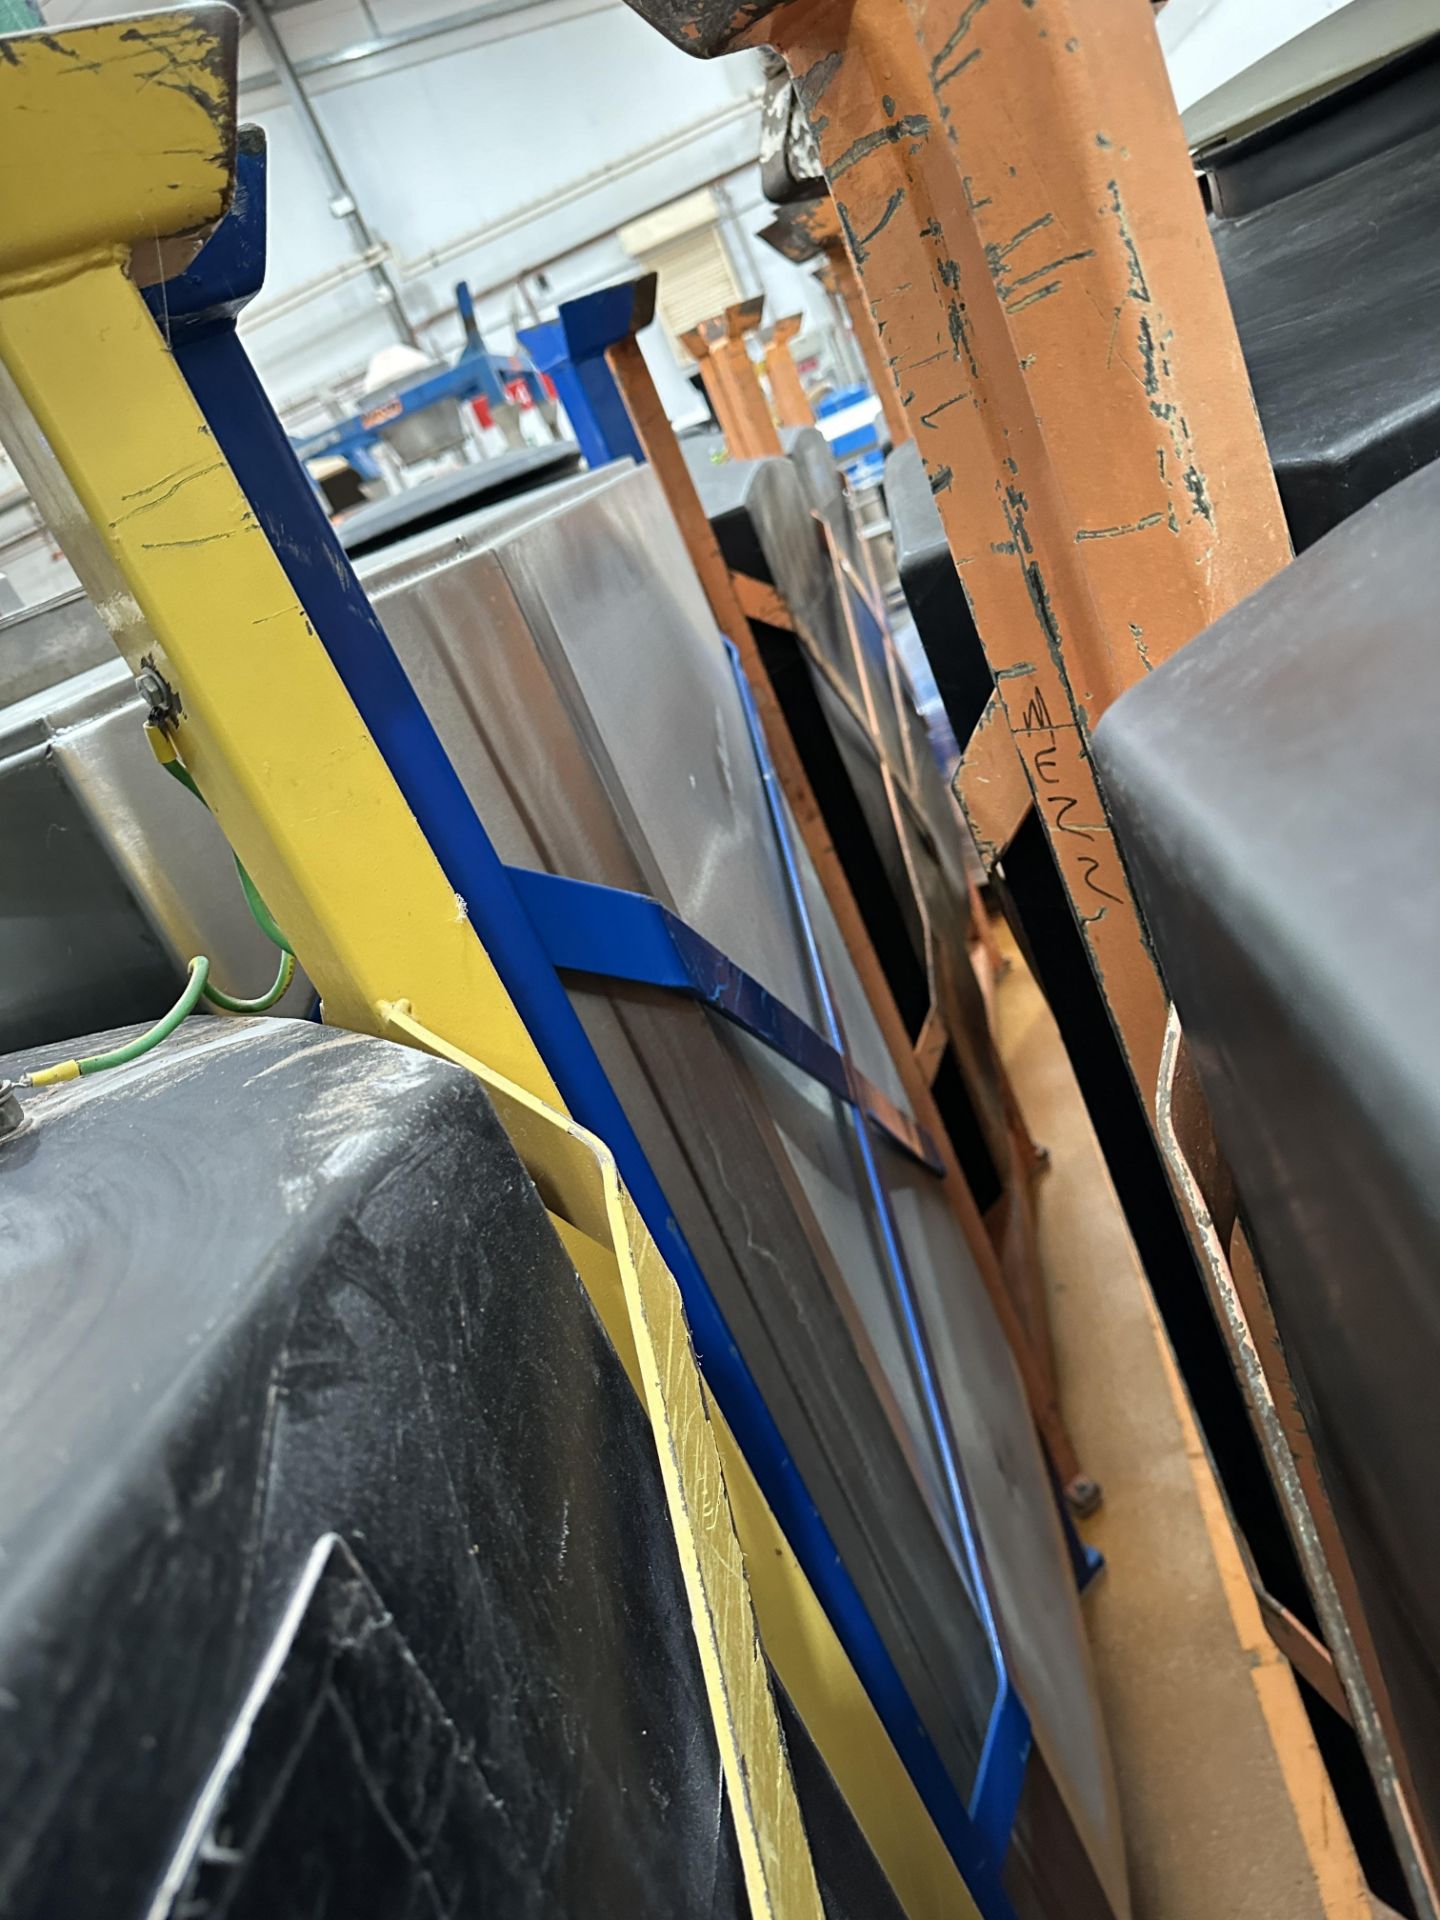 5 X FORKLIFTABLE FRAMES EACH HOLDING A S/S BIN. - Image 2 of 5